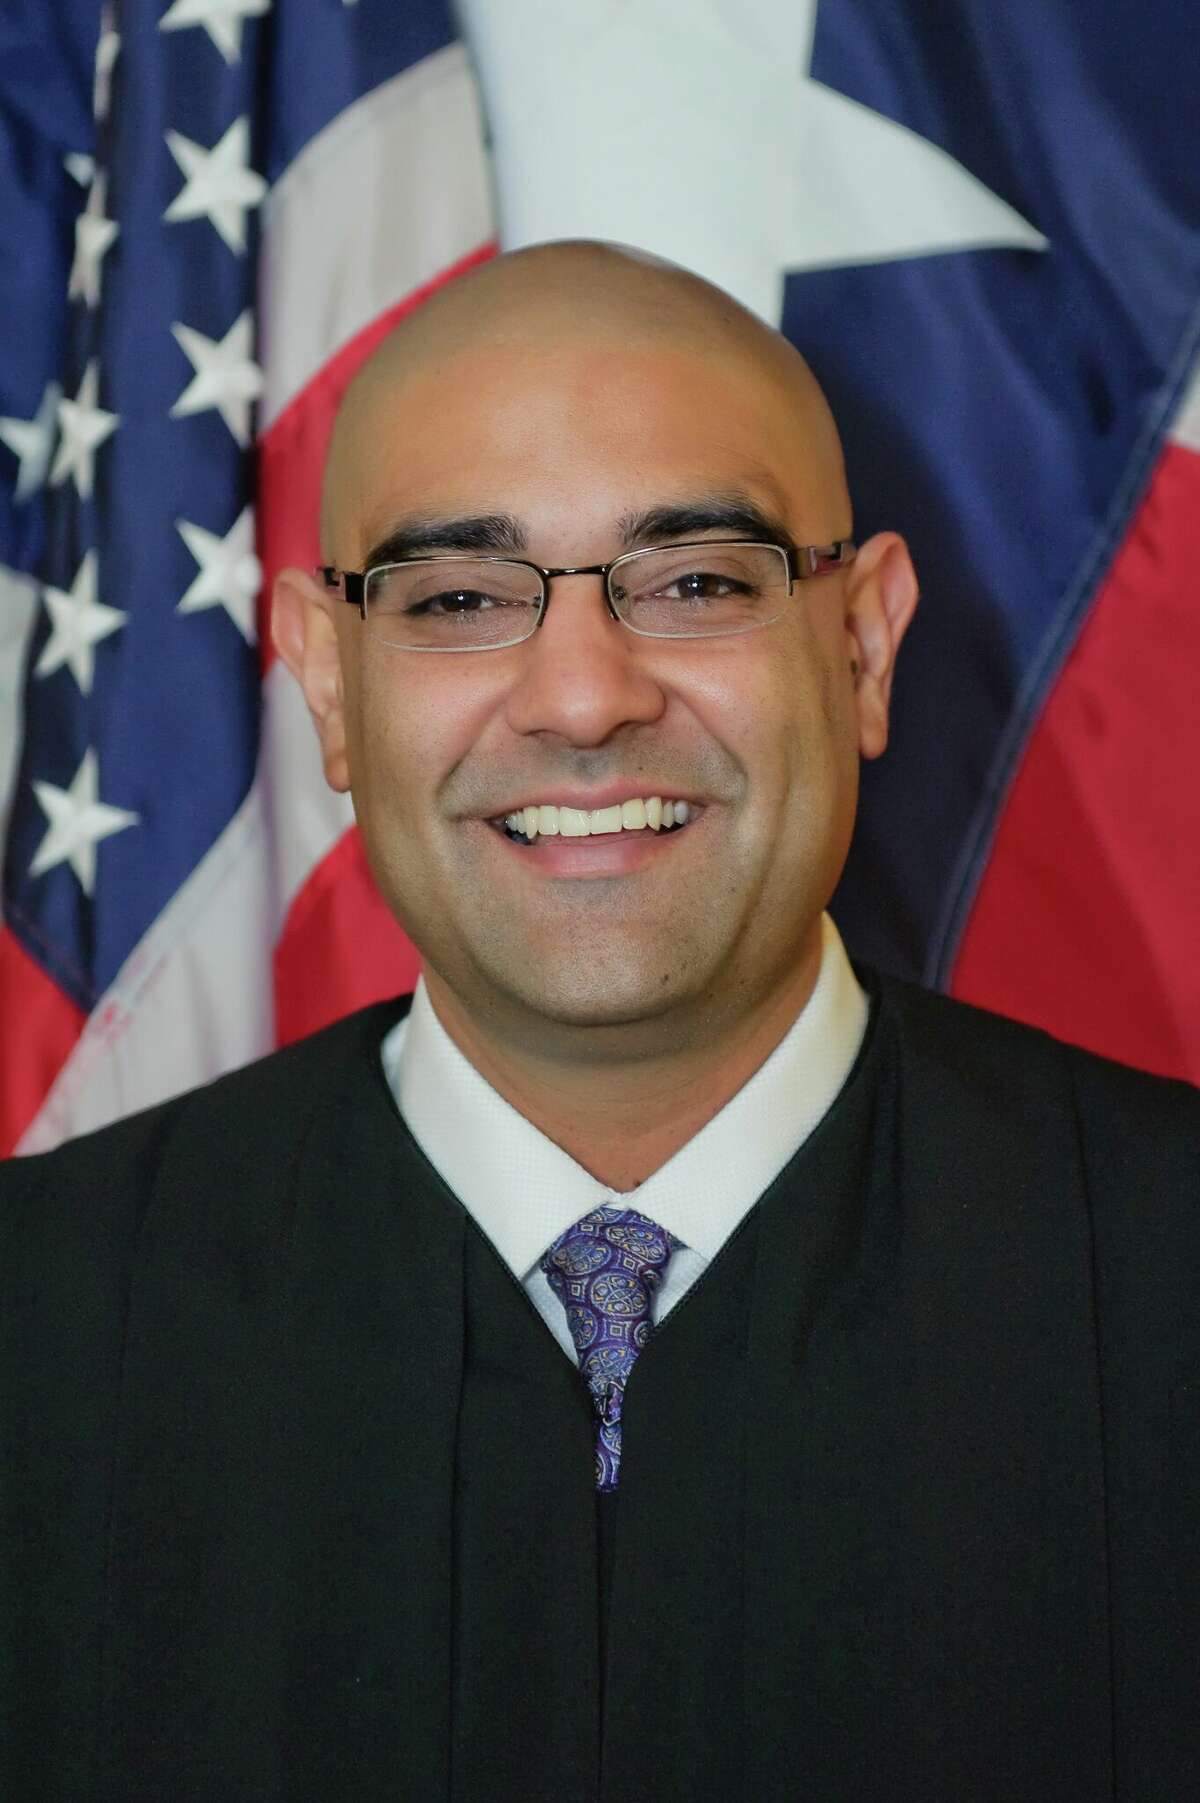 R.K. Sandill, (D), candidate for Supreme Court, Place 4.